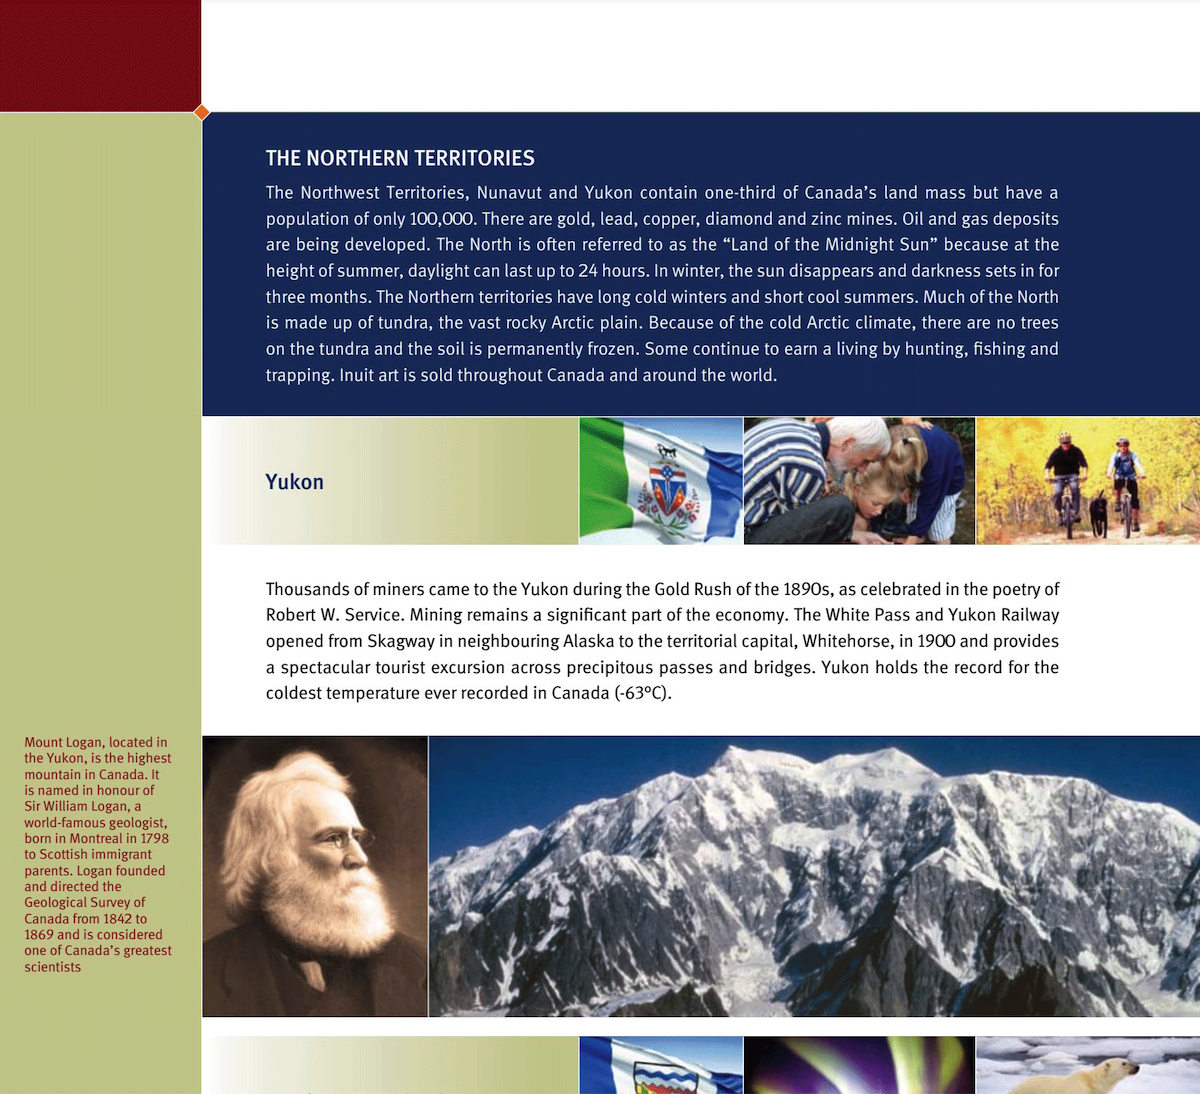 A page from the Discover Canada study guide features information about Canada’s northern territories. The page features the Yukon flag, photographs of families engaging in activities in the north, of mountain ranges and an archival portrait of a historical geologist.